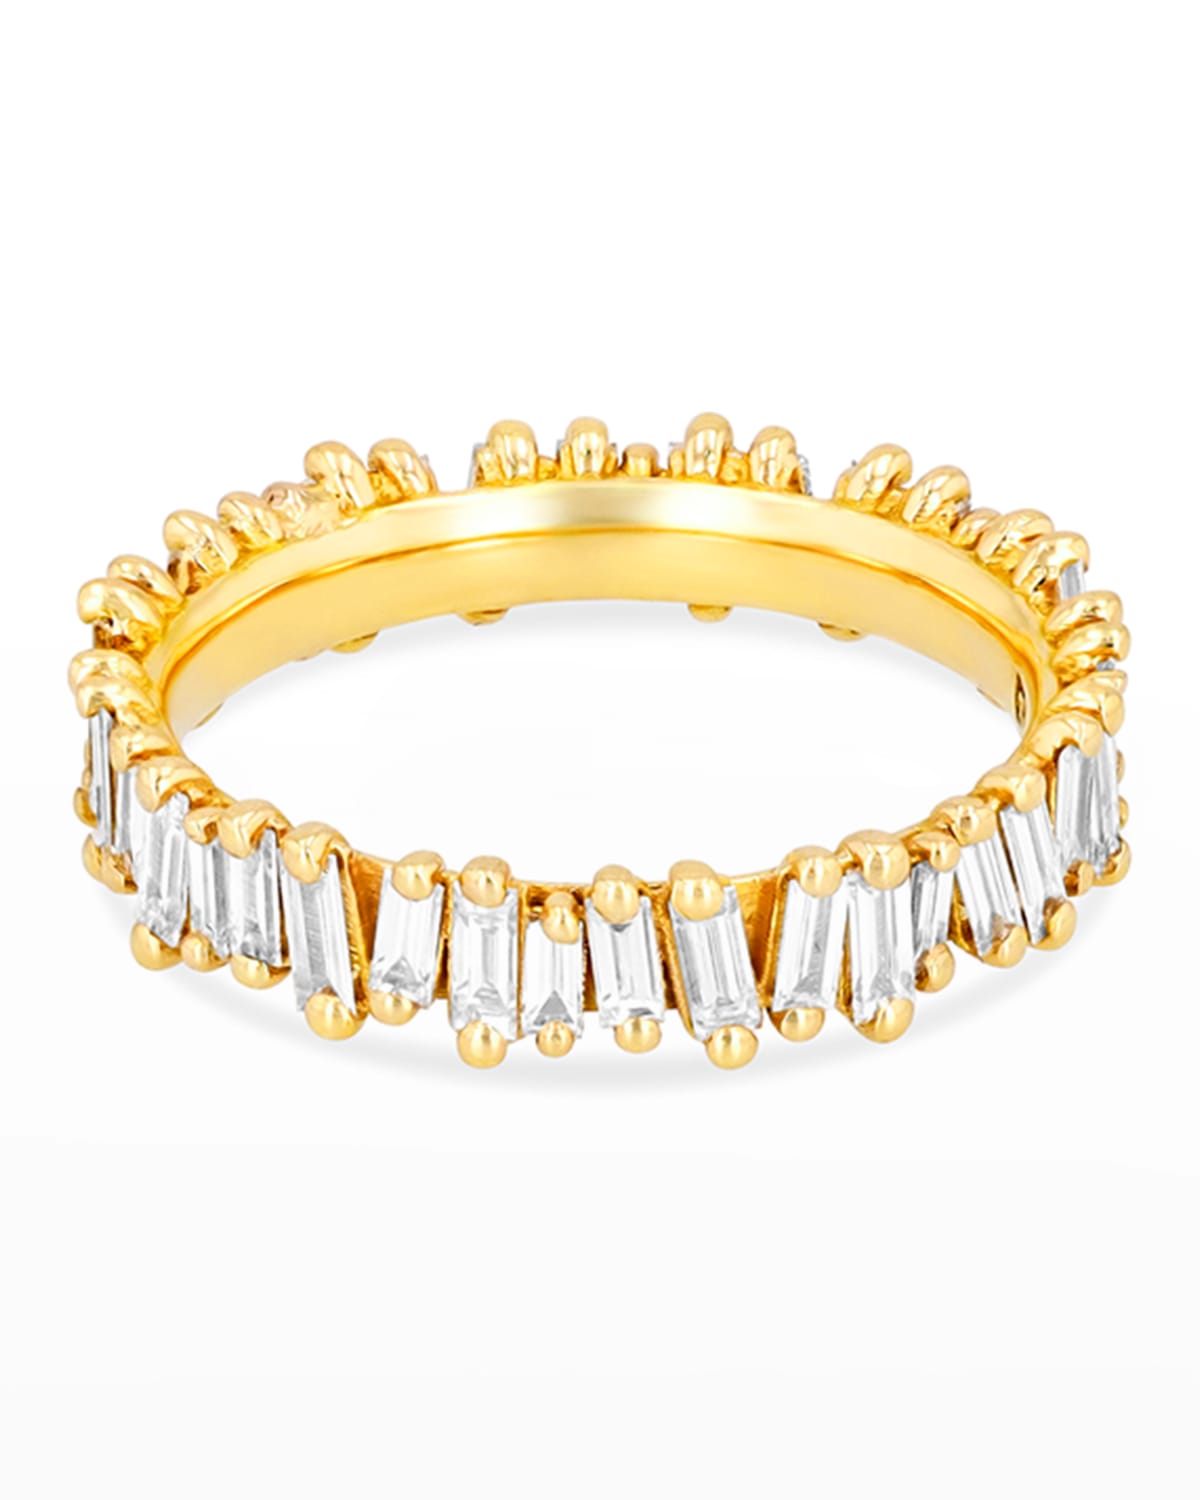 Suzanne Kalan 18k Diamond Classic Fireworks Eternity Band Ring Size 4.5-8 In Yellow/gold